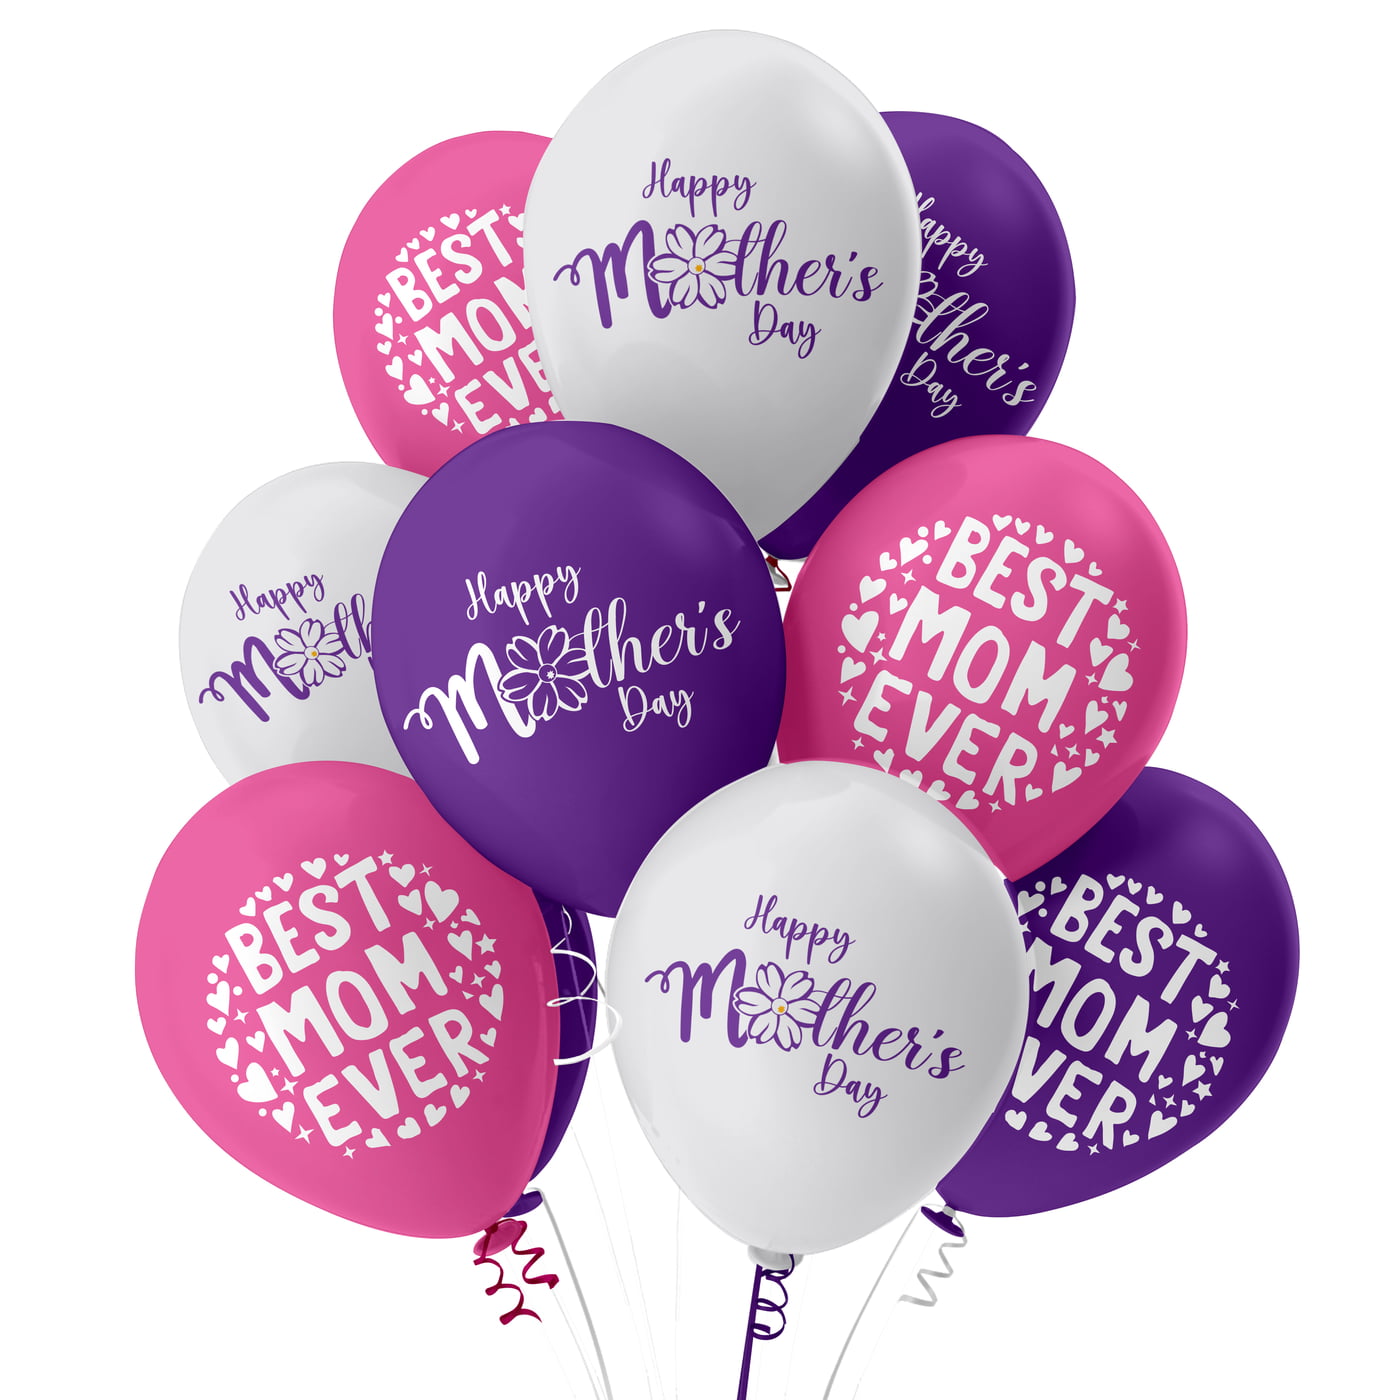 The Magic Balloons - Celebrate This Mother's Day with Our Best Mom Ever and Happy Mother's Day Balloons (Pack of 30 Multicolor Balloons) - Party Supplier